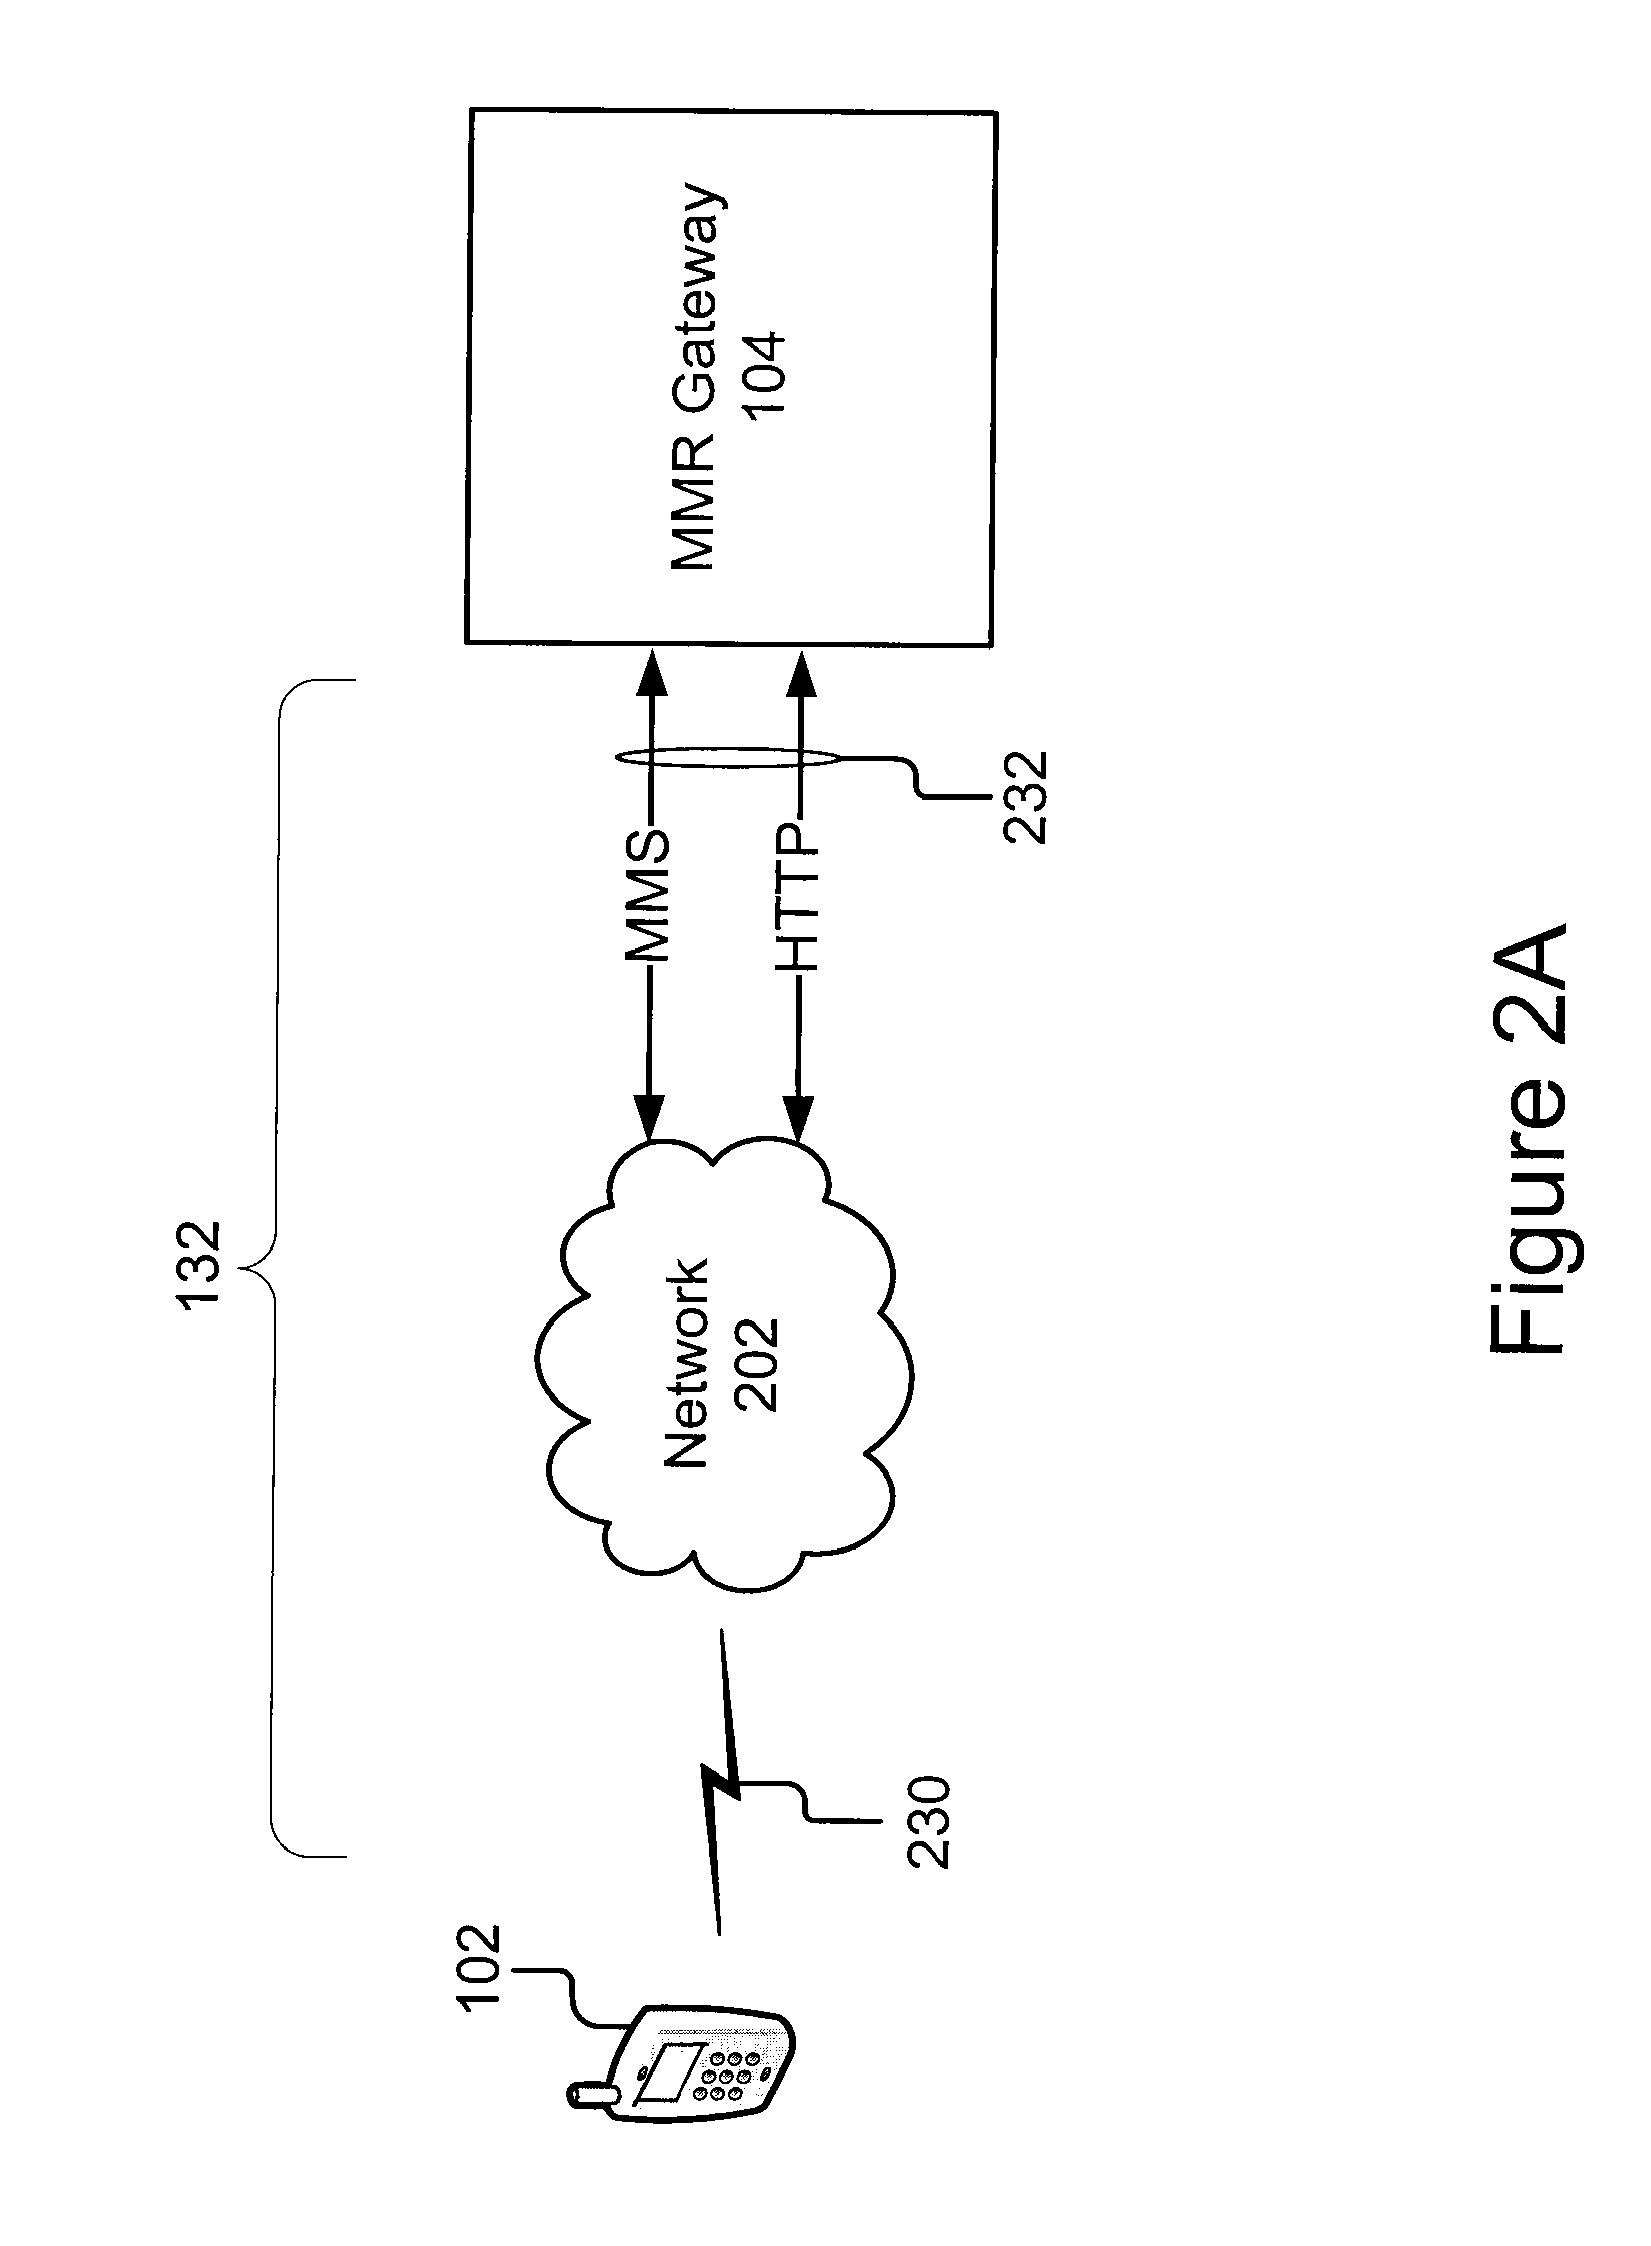 Automatic adaption of an image recognition system to image capture devices